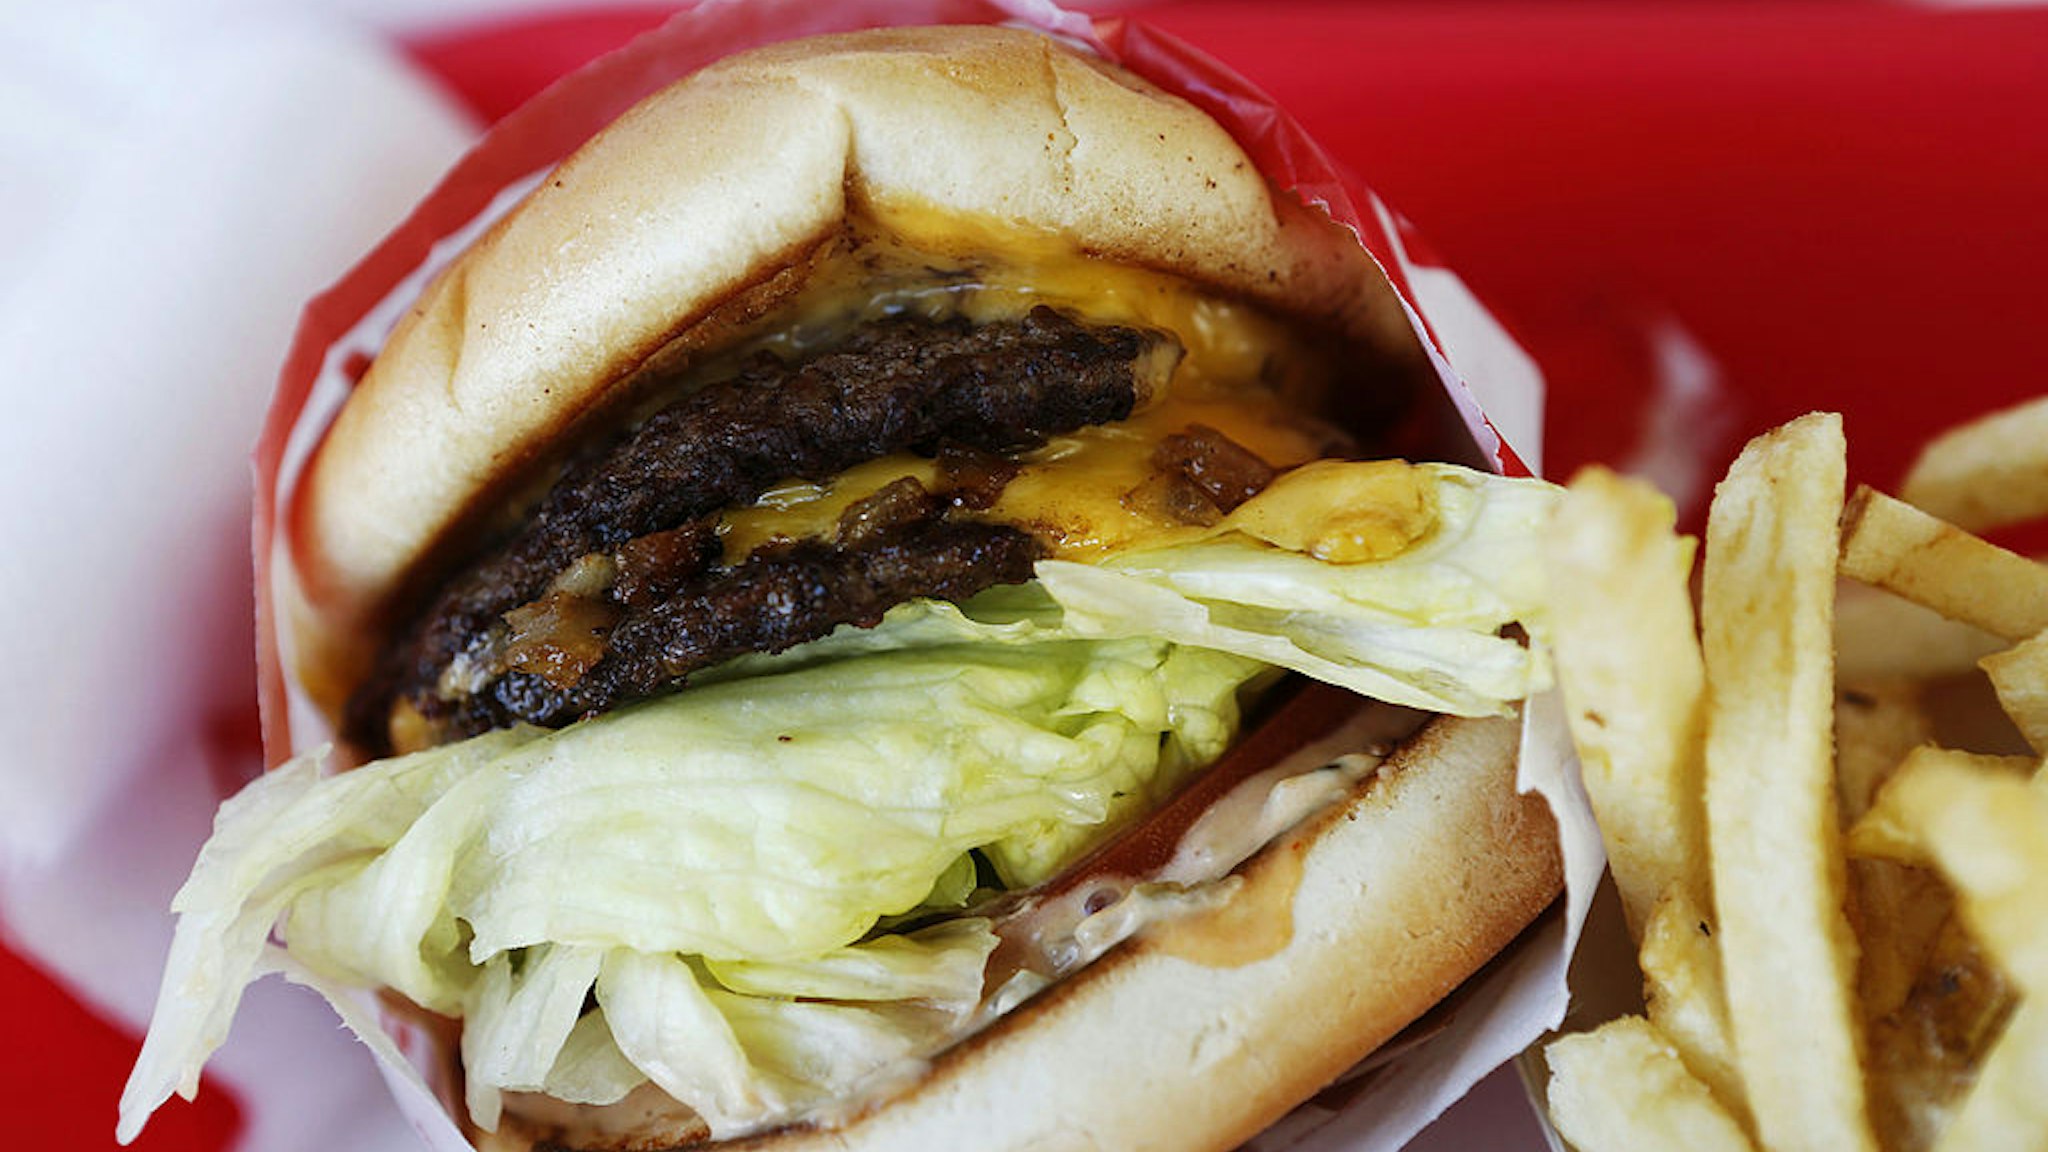 In-N-Out Burger's signature Double-Double cheeseburger and french fries are arranged for a photograph at a restaurant in Costa Mesa, California, U.S., on Wednesday, Feb. 6, 2013.